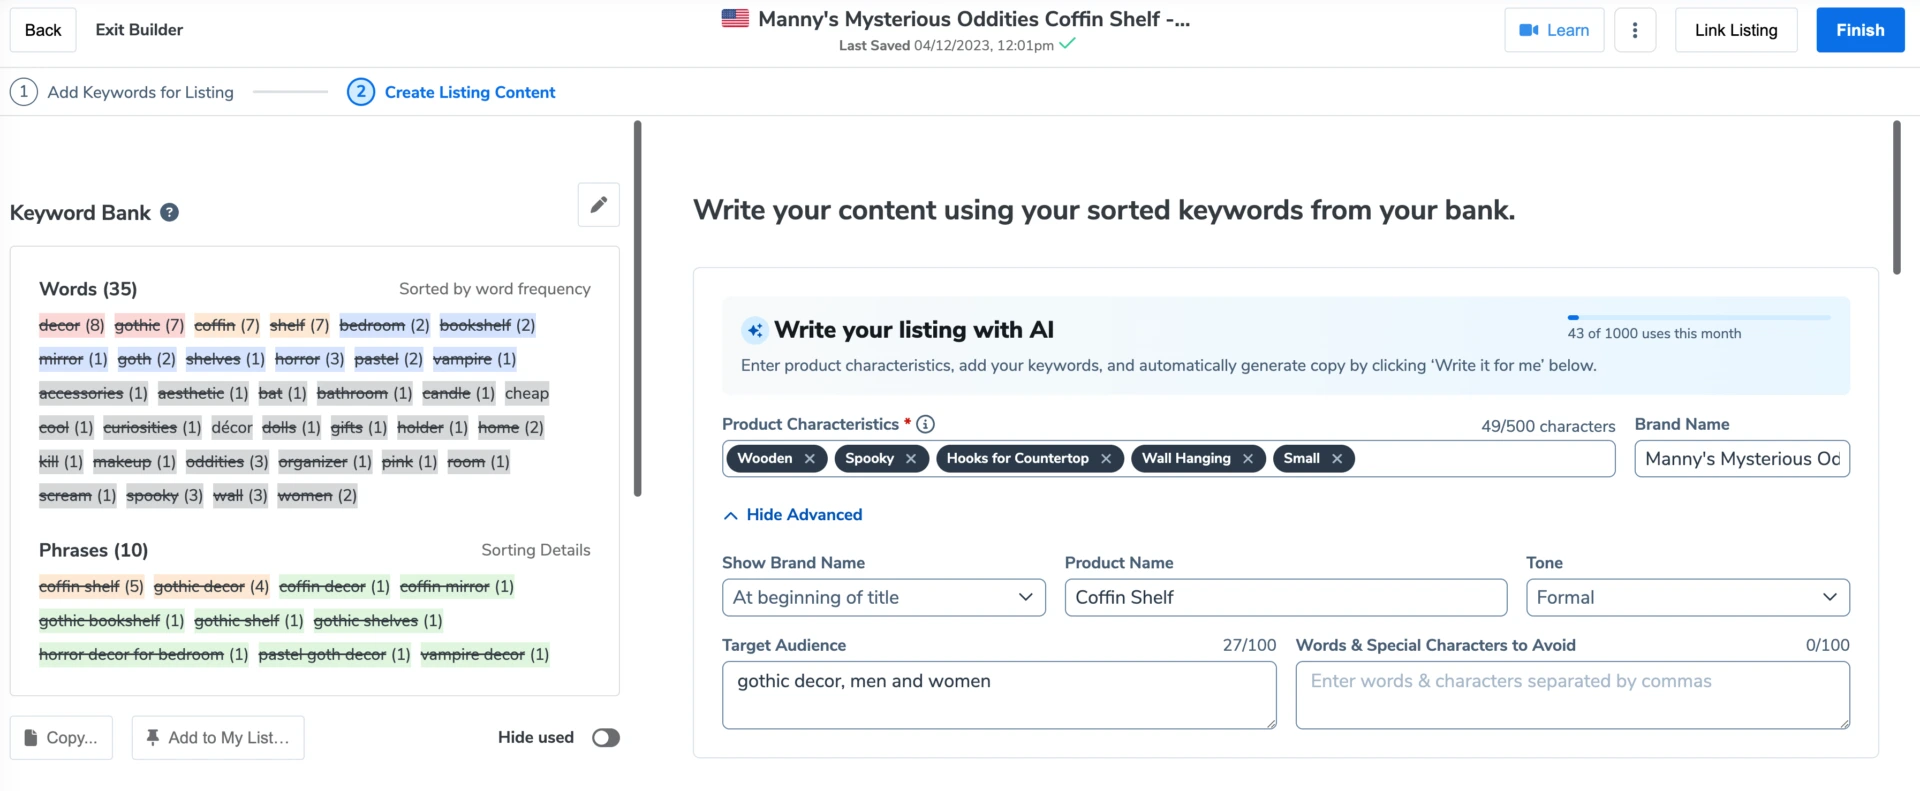 Listing Builder sorted keywords and phrases